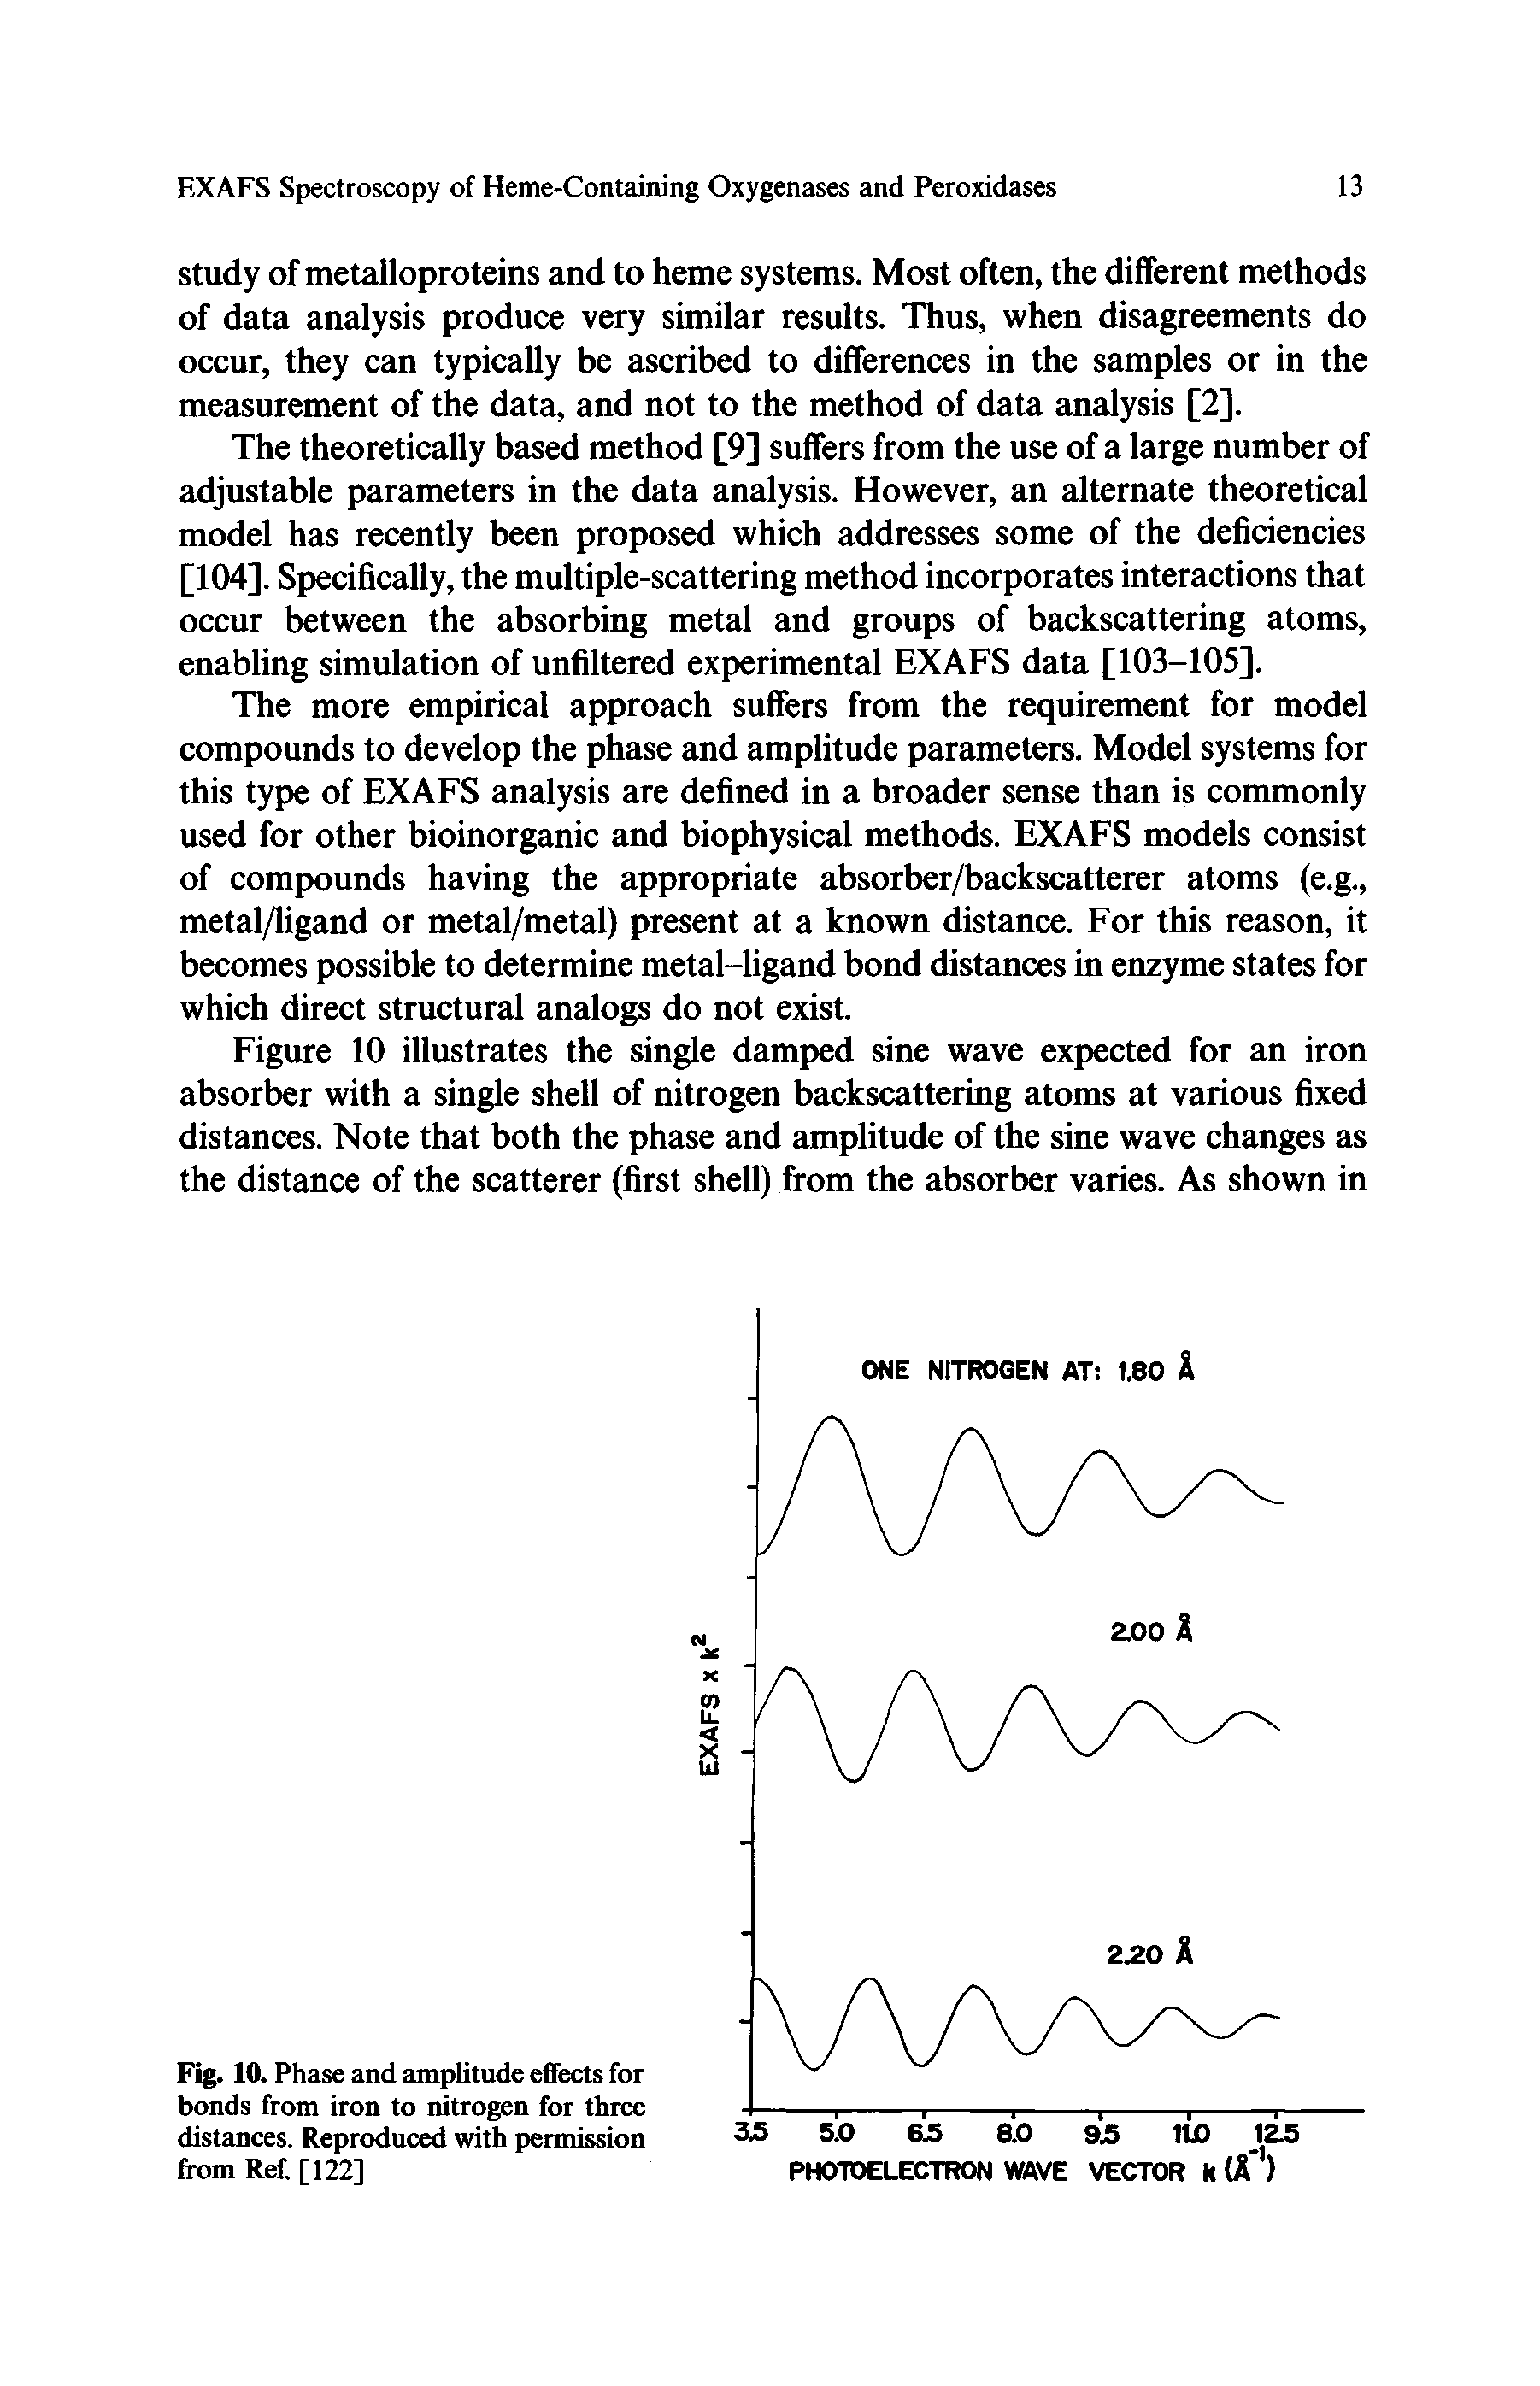 Fig. 10. Phase and amplitude effects for bonds from iron to nitrogen for three distances. Reproduced with permission from Ref. [122]...